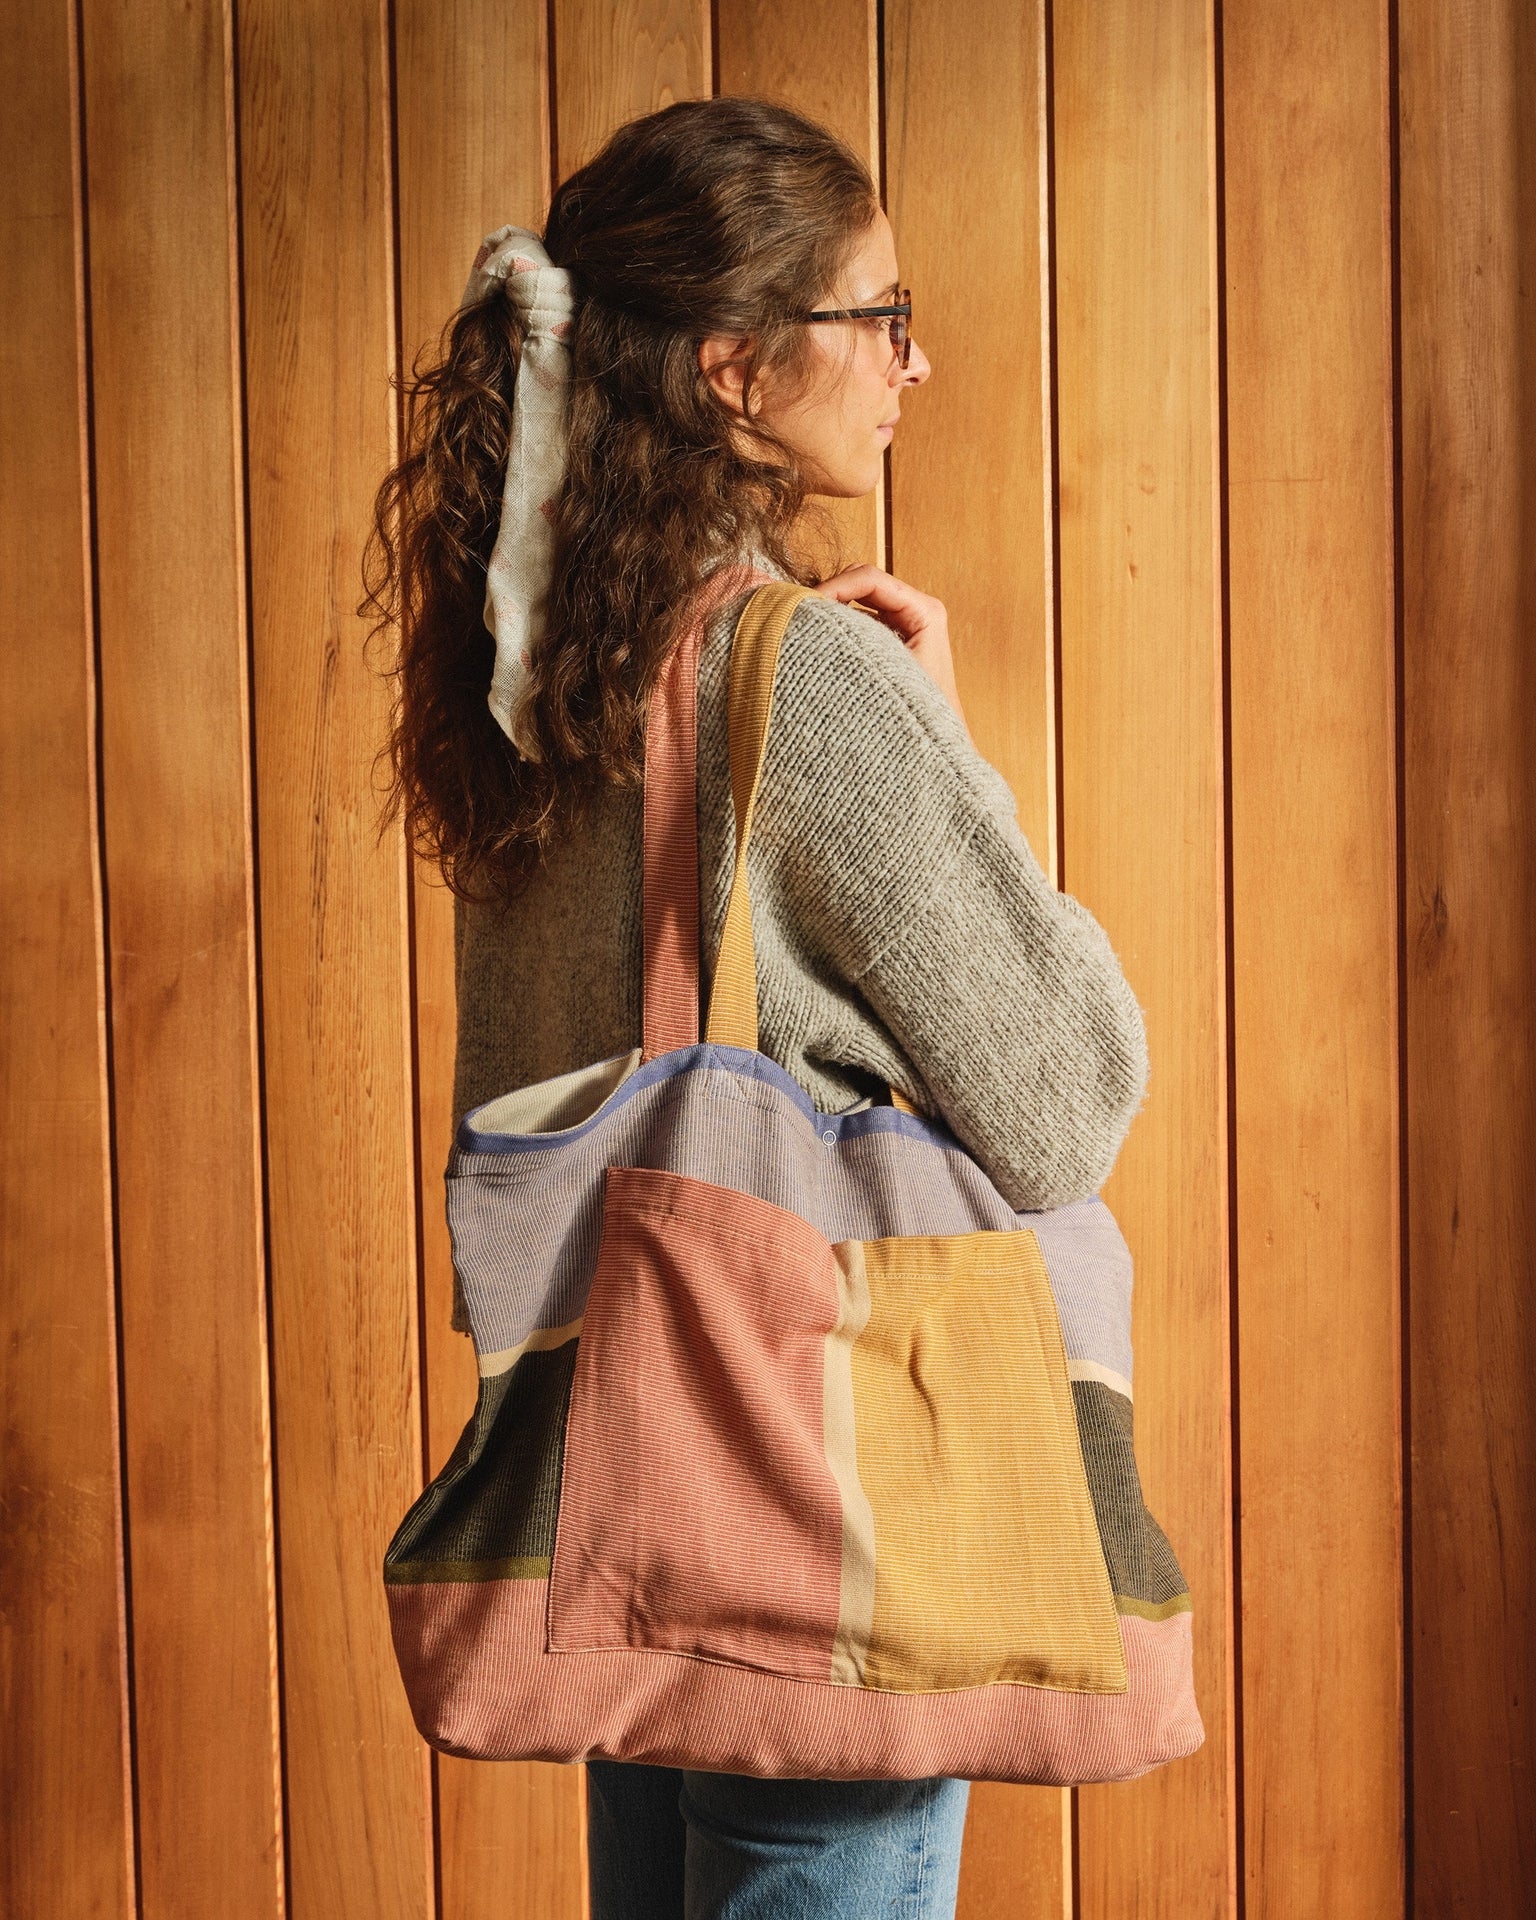 The Valley Bag brings forward the ease and function of a weekender bag. Take it on your next day trip, farmer's market run or as your everyday-bag. Handwoven with 100% natural color fibers by master artisans in San Antonio Palopó, Guatemala.